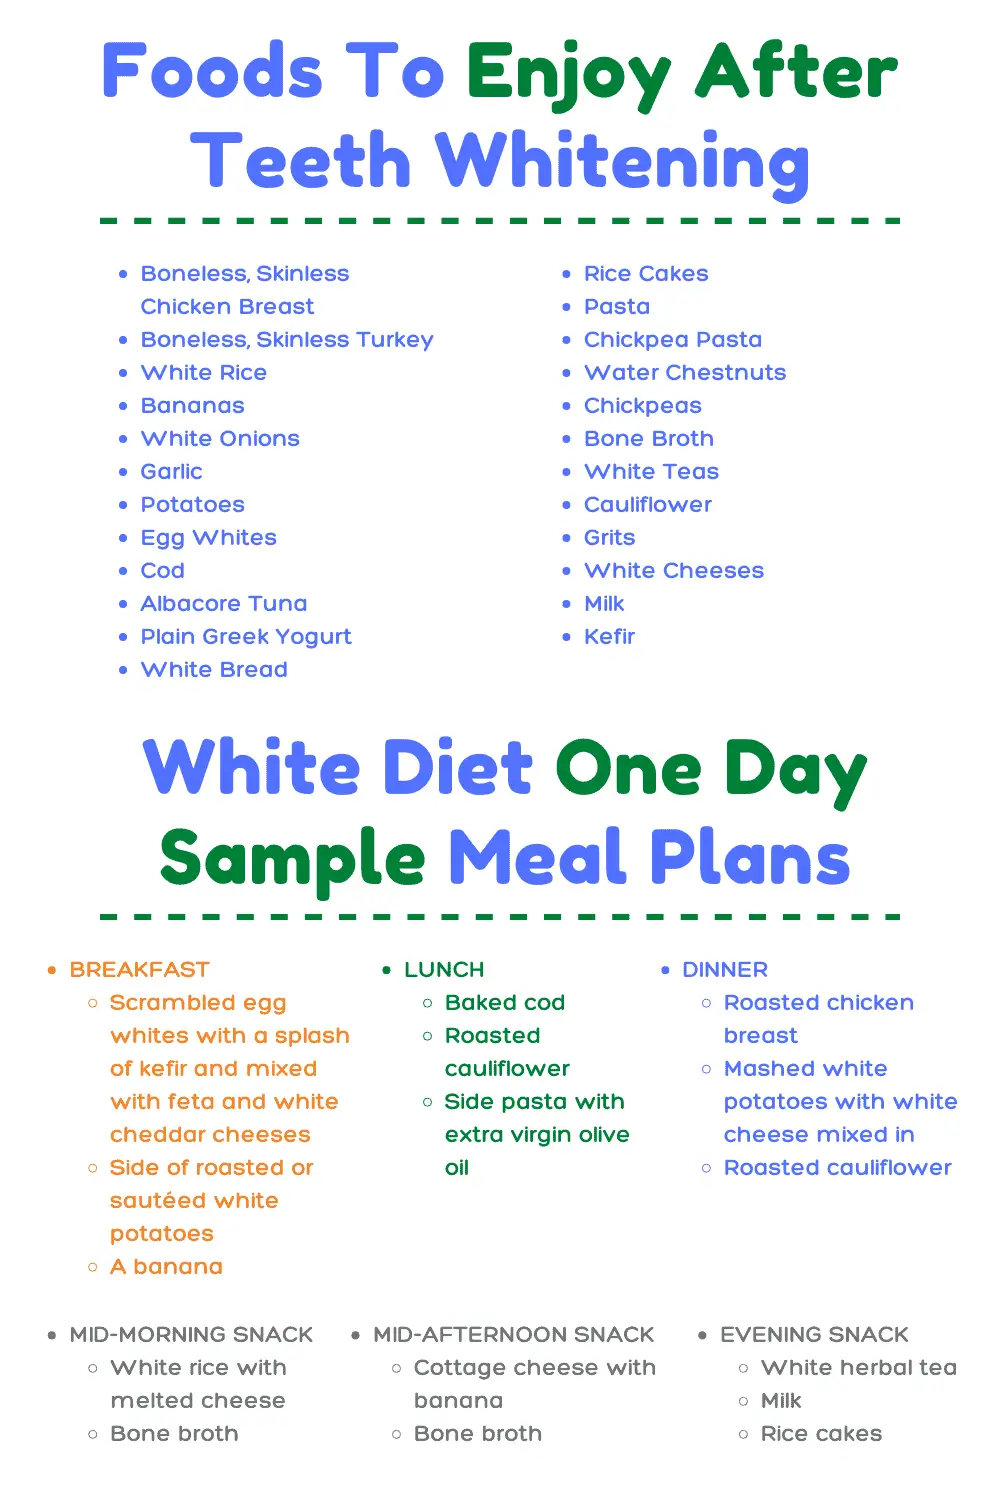 list of foods to enjoy after teeth whitening along with a one day white diet sample meal plan